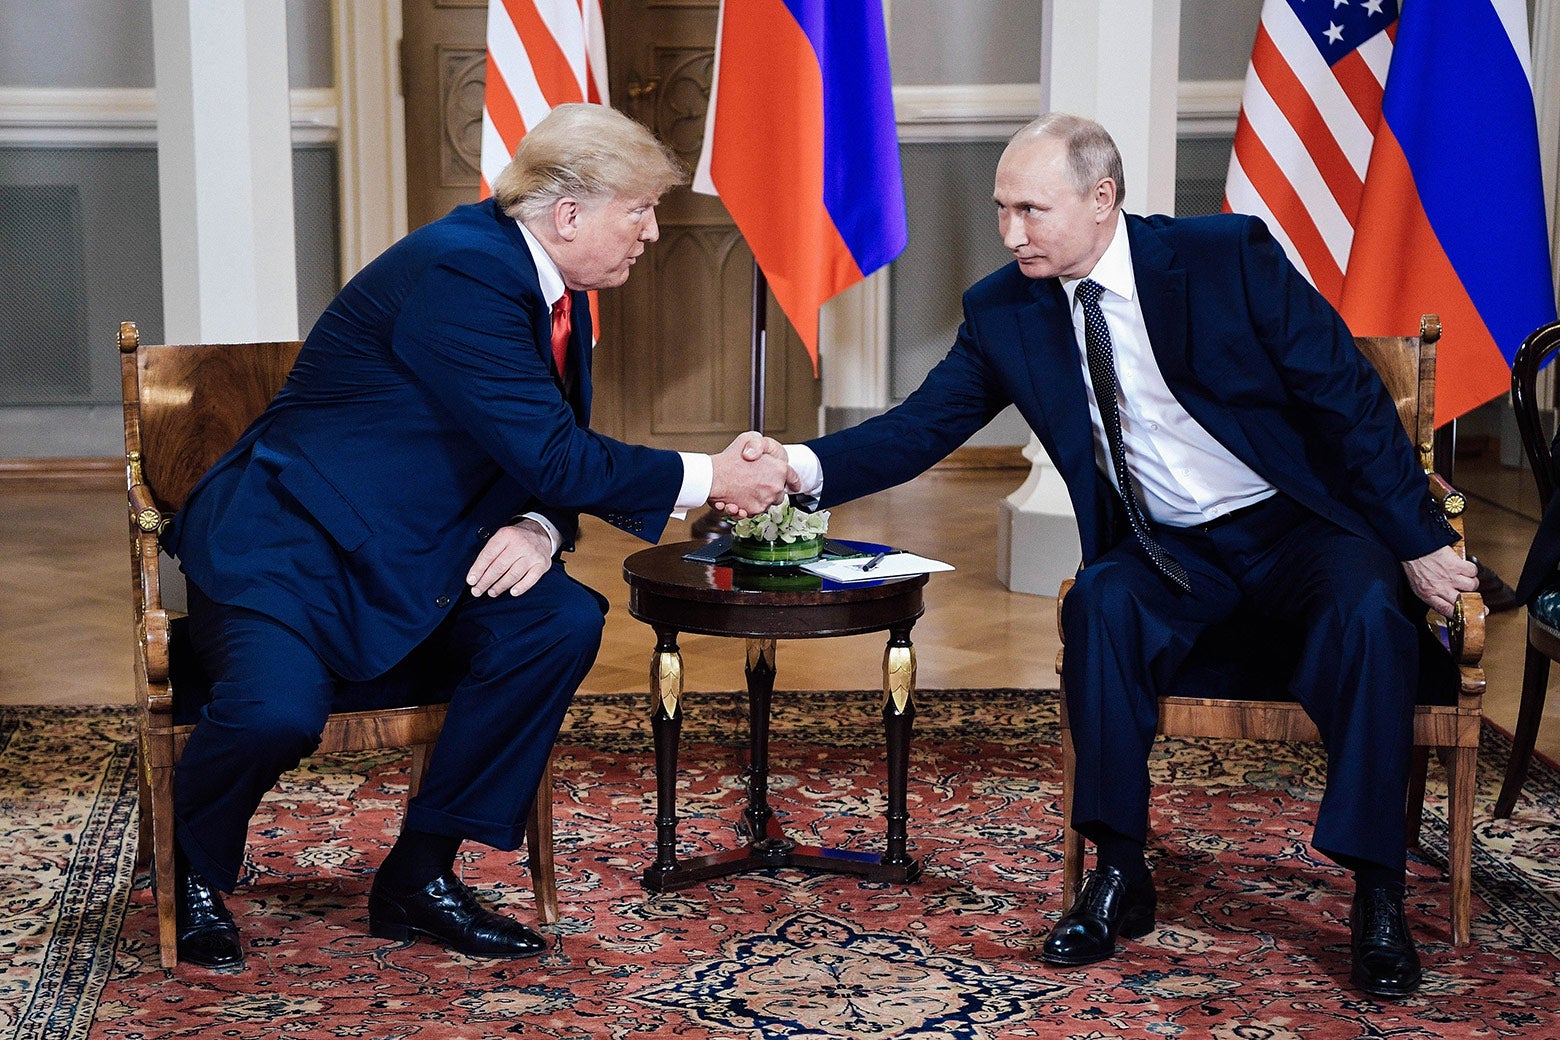 President Donald Trump shakes hands with Russia's President Vladimir Putin during a meeting in Helsinki, Finland, on Monday.